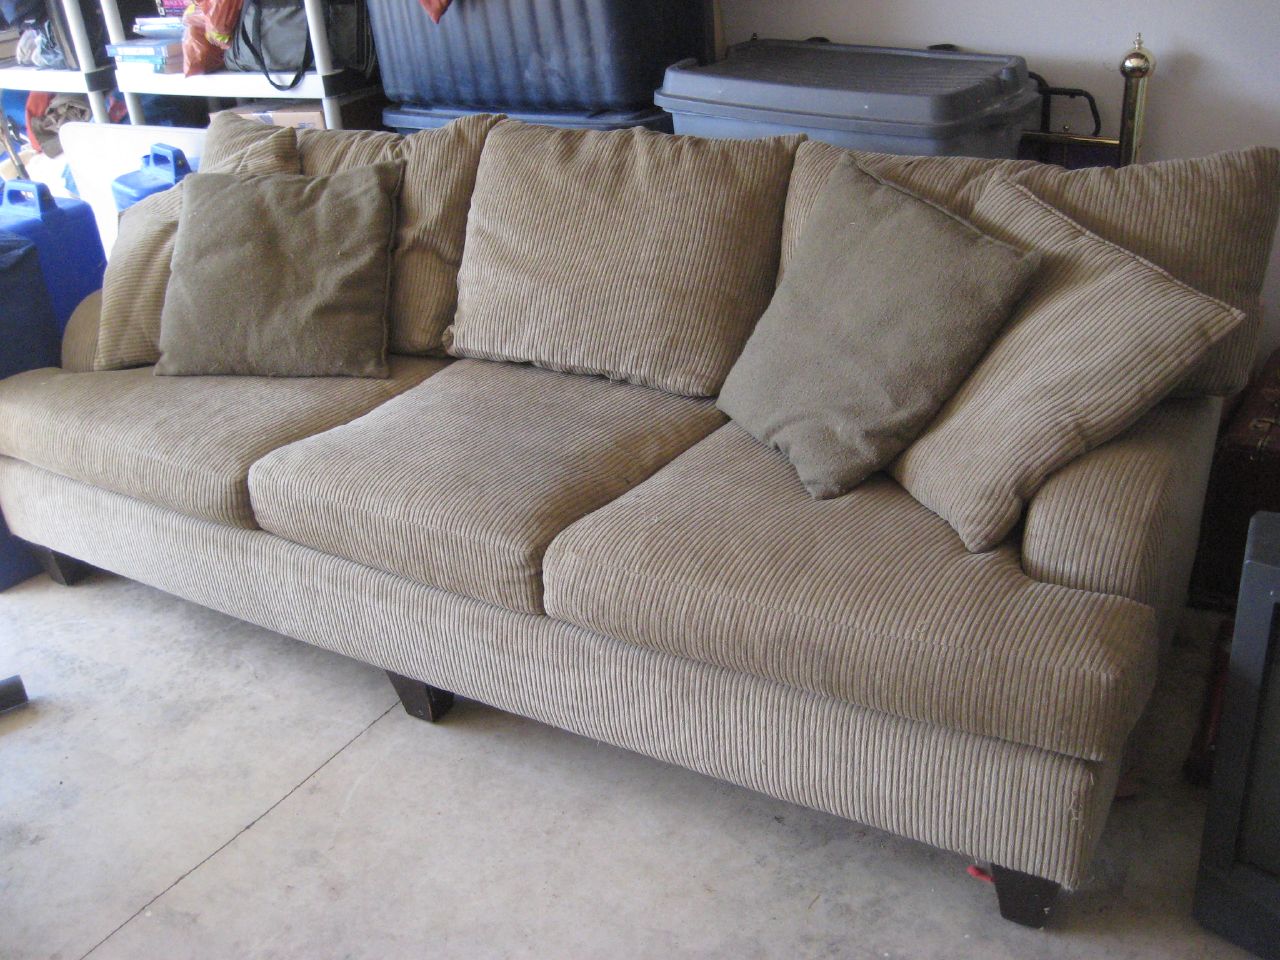 the couch is made from a vintage brown